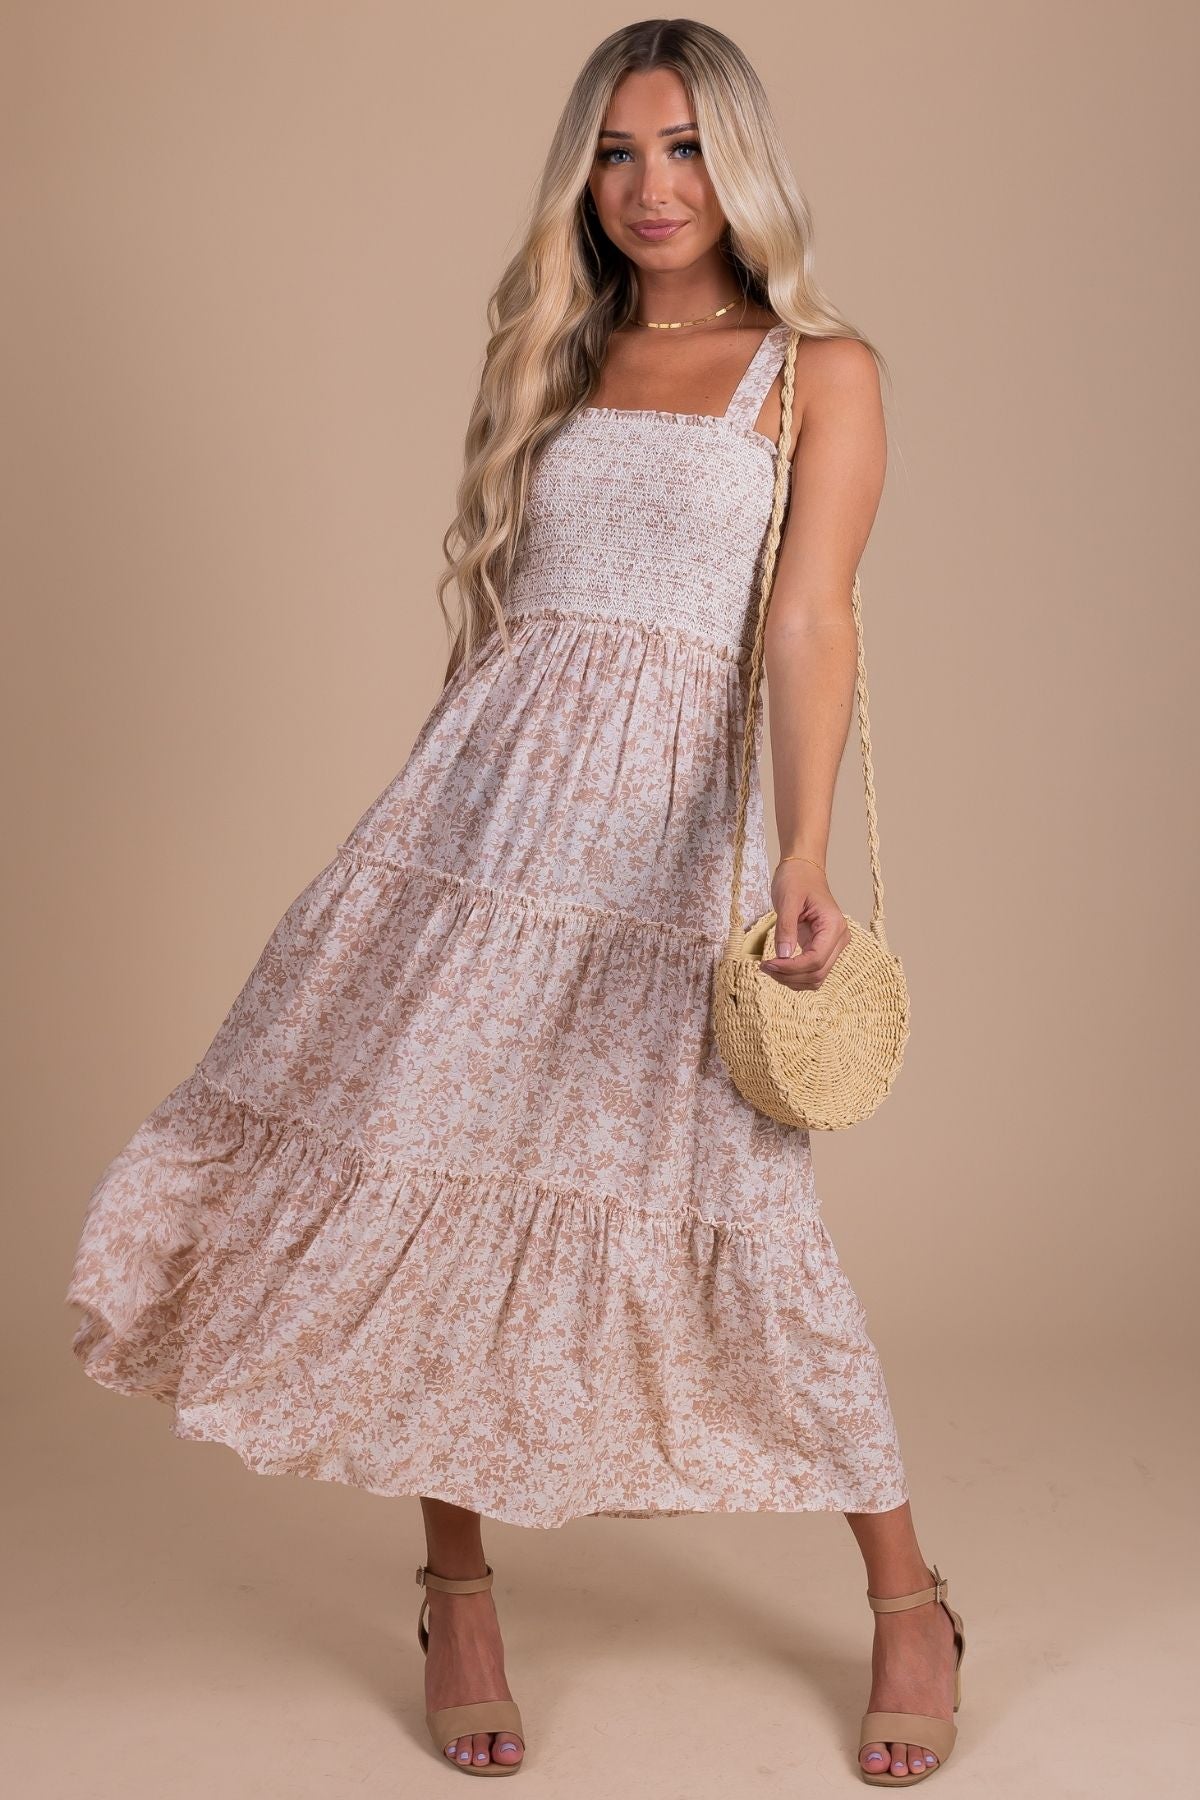 Women's Floral Maxi Dress in Mauve and White